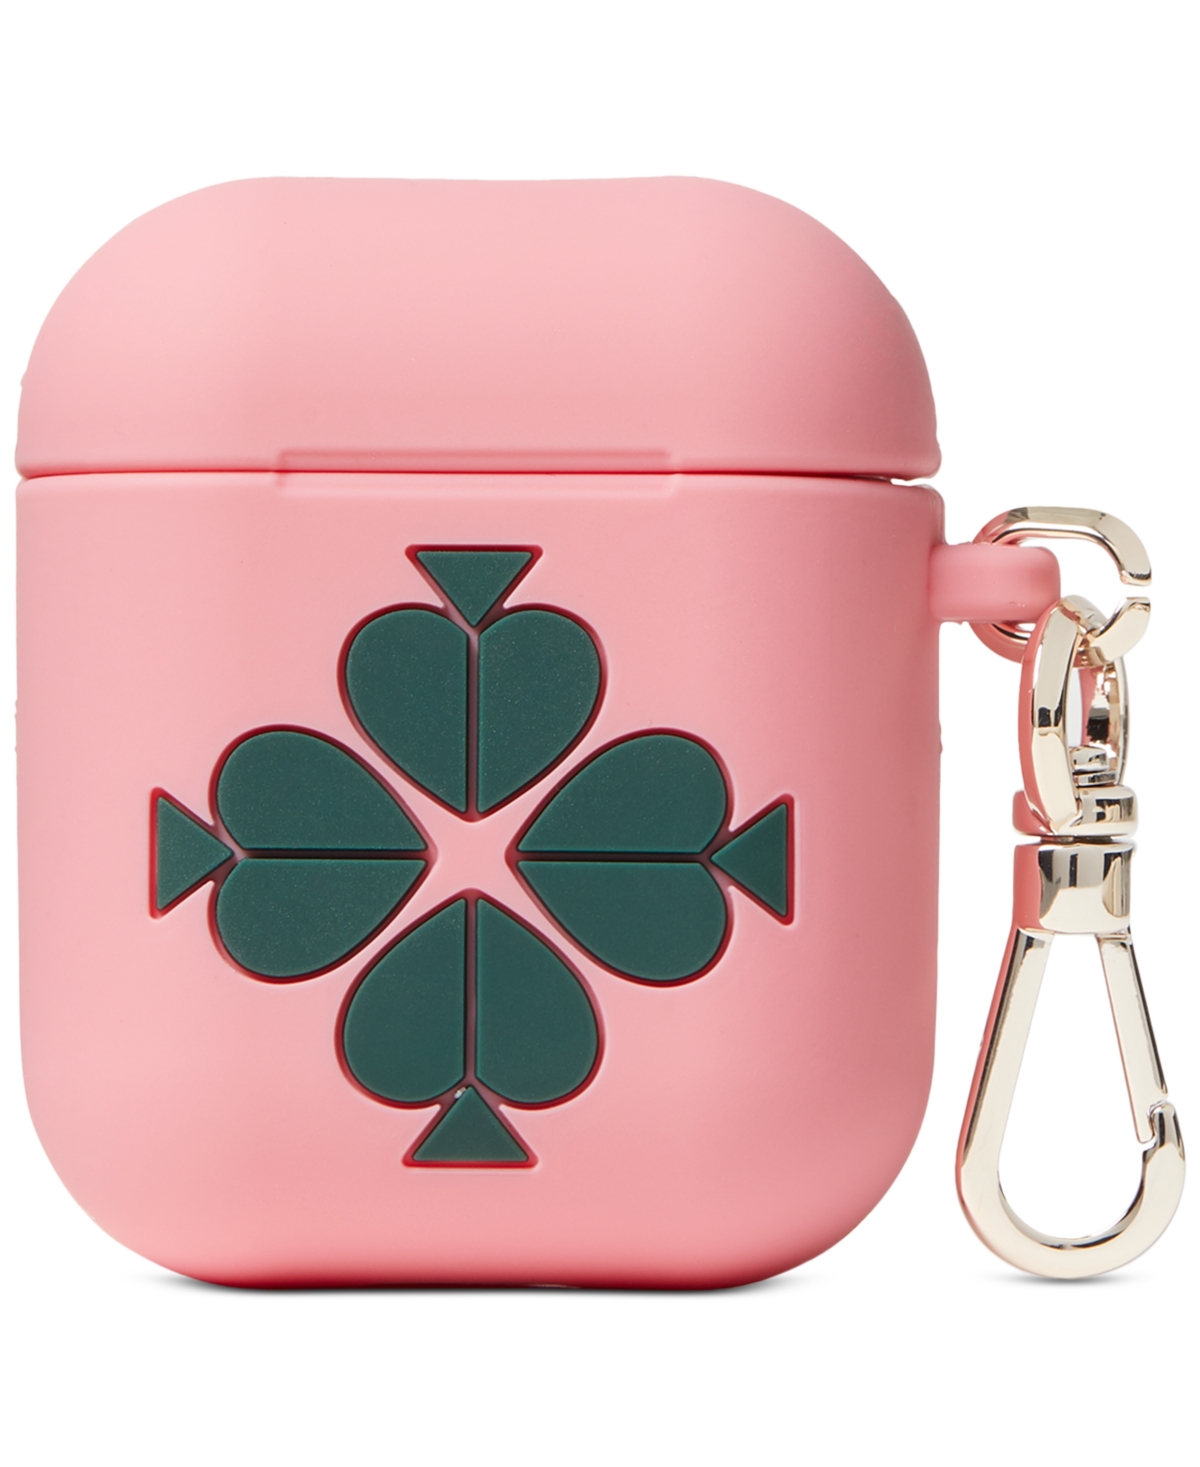 UPC 767883643204 product image for kate spade new york Silicone AairPod Case | upcitemdb.com